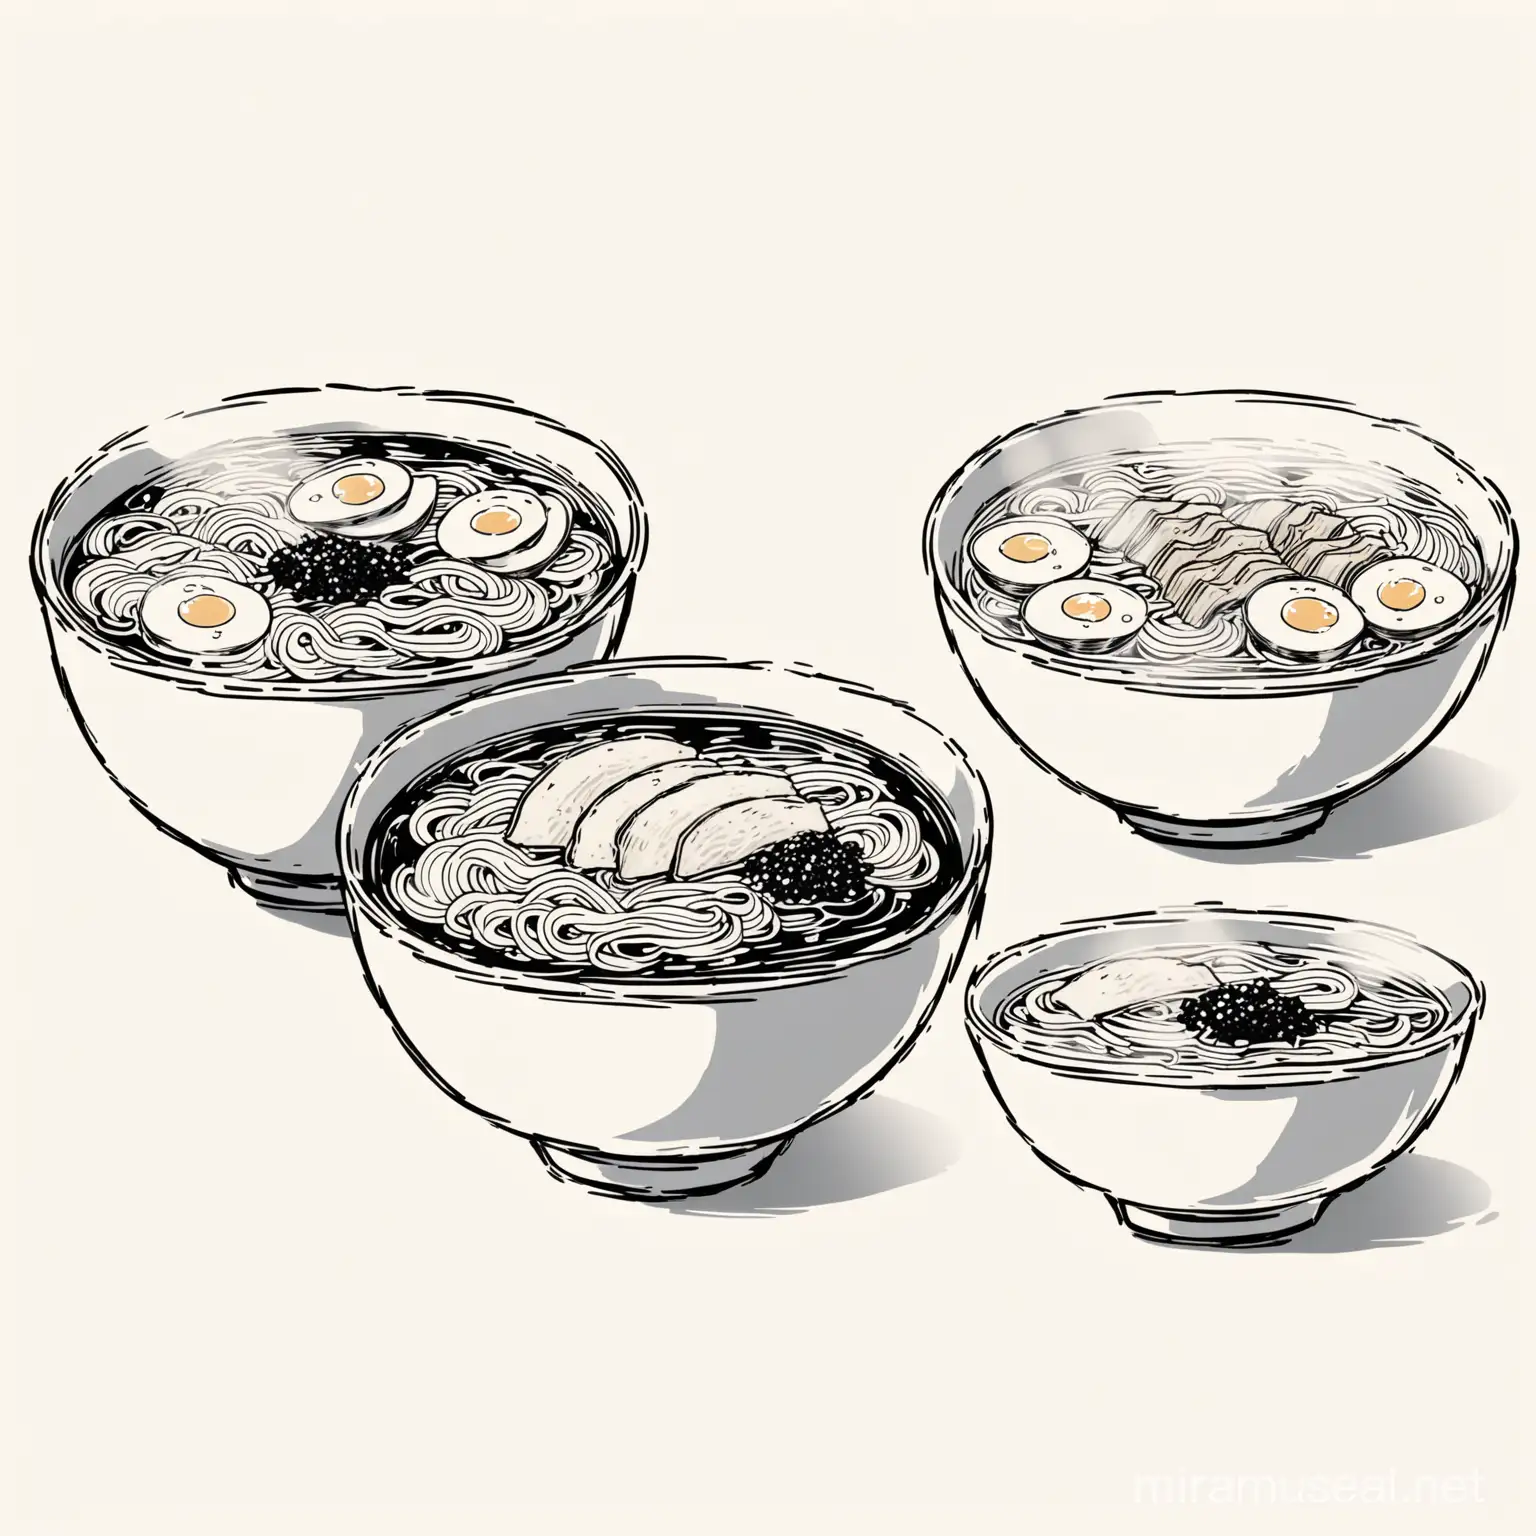 outline drawings of bowls of ramen in black and white